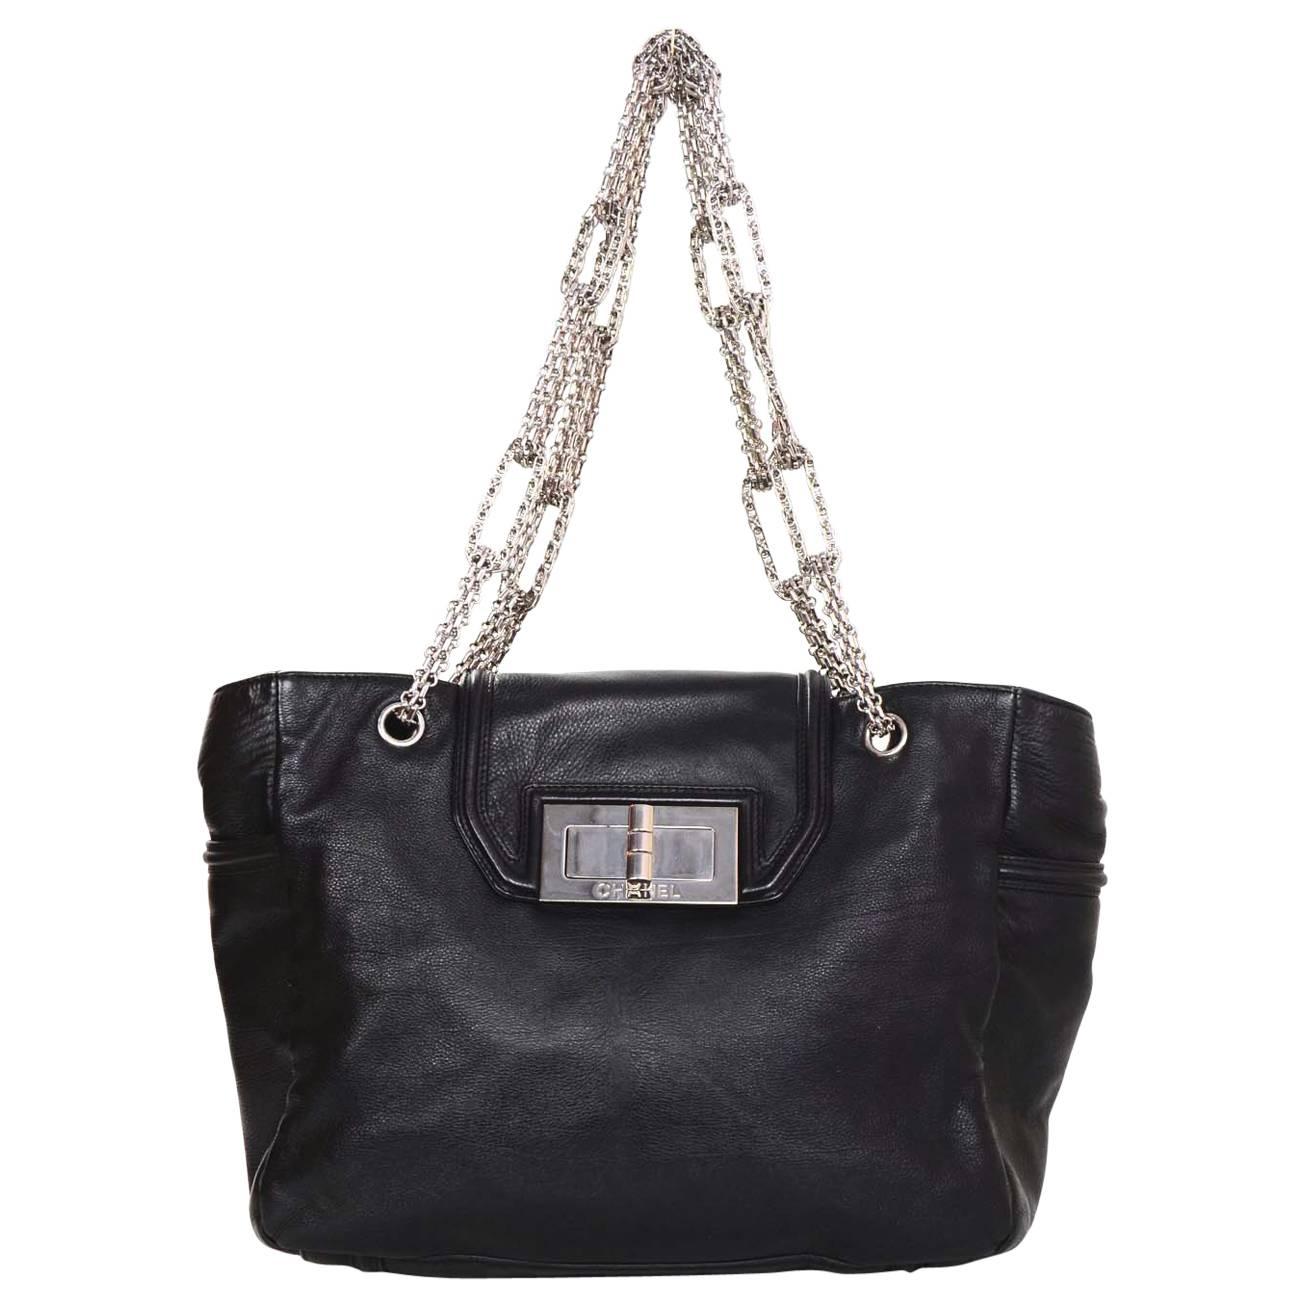 Chanel Black Leather 2.55 Reissue Lock Tote w/ Heavy Chain Straps rt. $3, 995